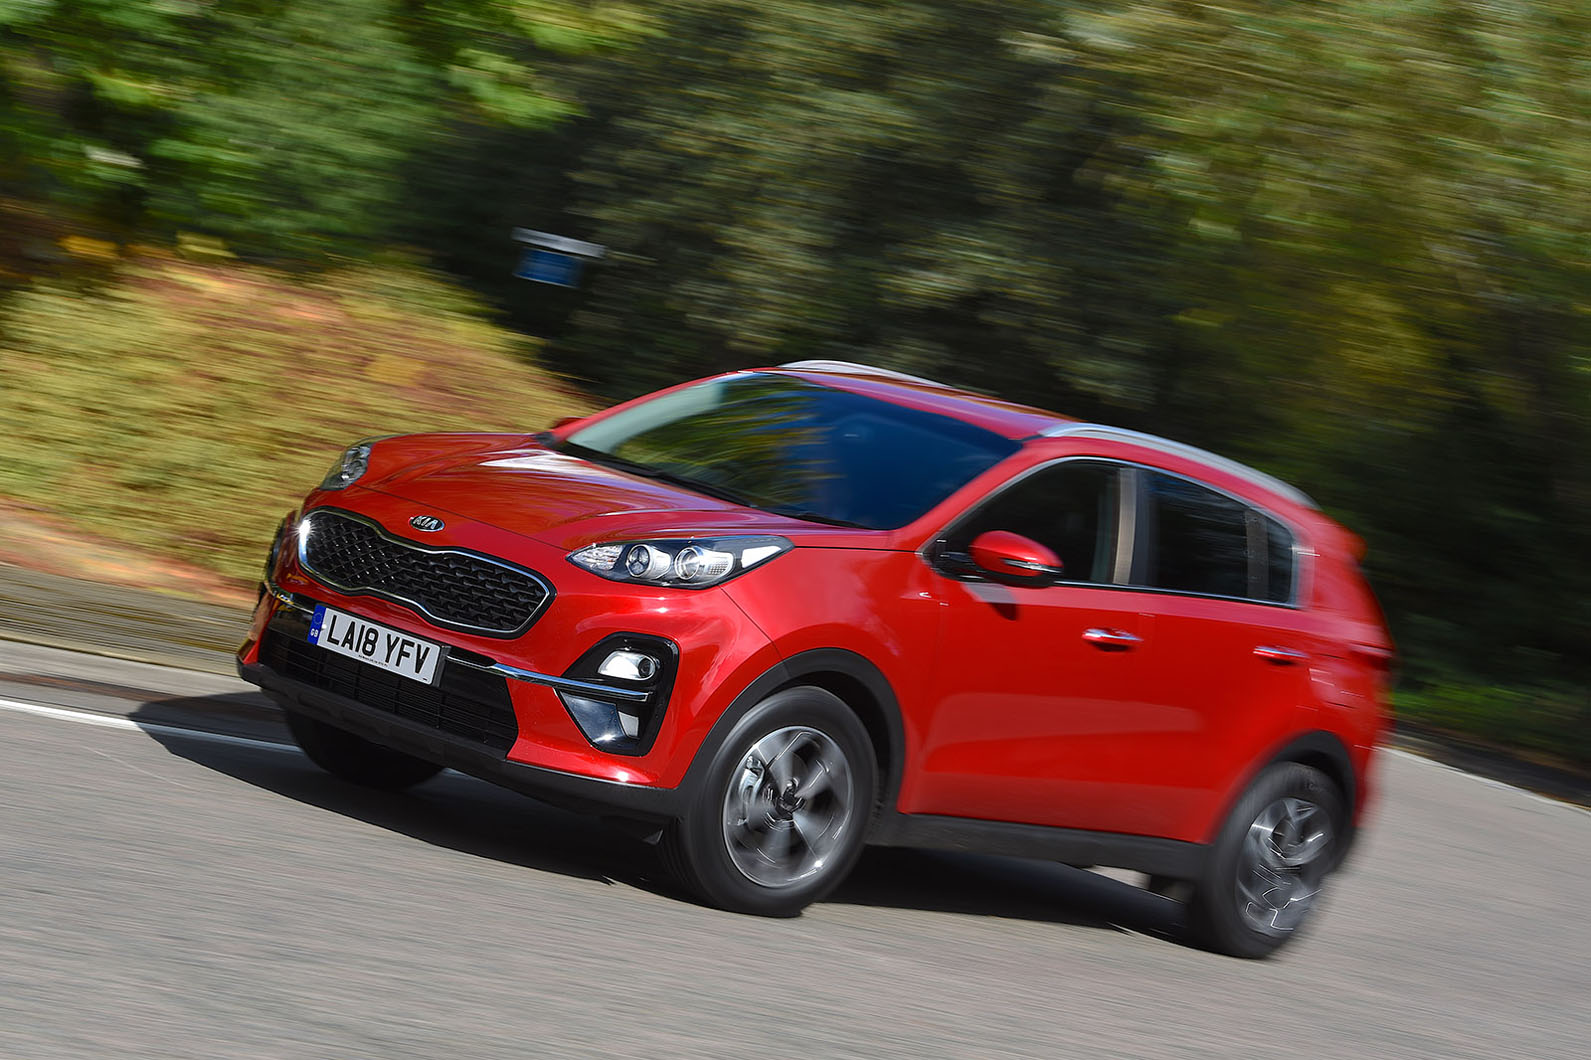 https://www.autocar.co.uk/sites/autocar.co.uk/files/images/car-reviews/first-drives/legacy/1-kia-sportage-2-2018-fd-hero-front.jpg